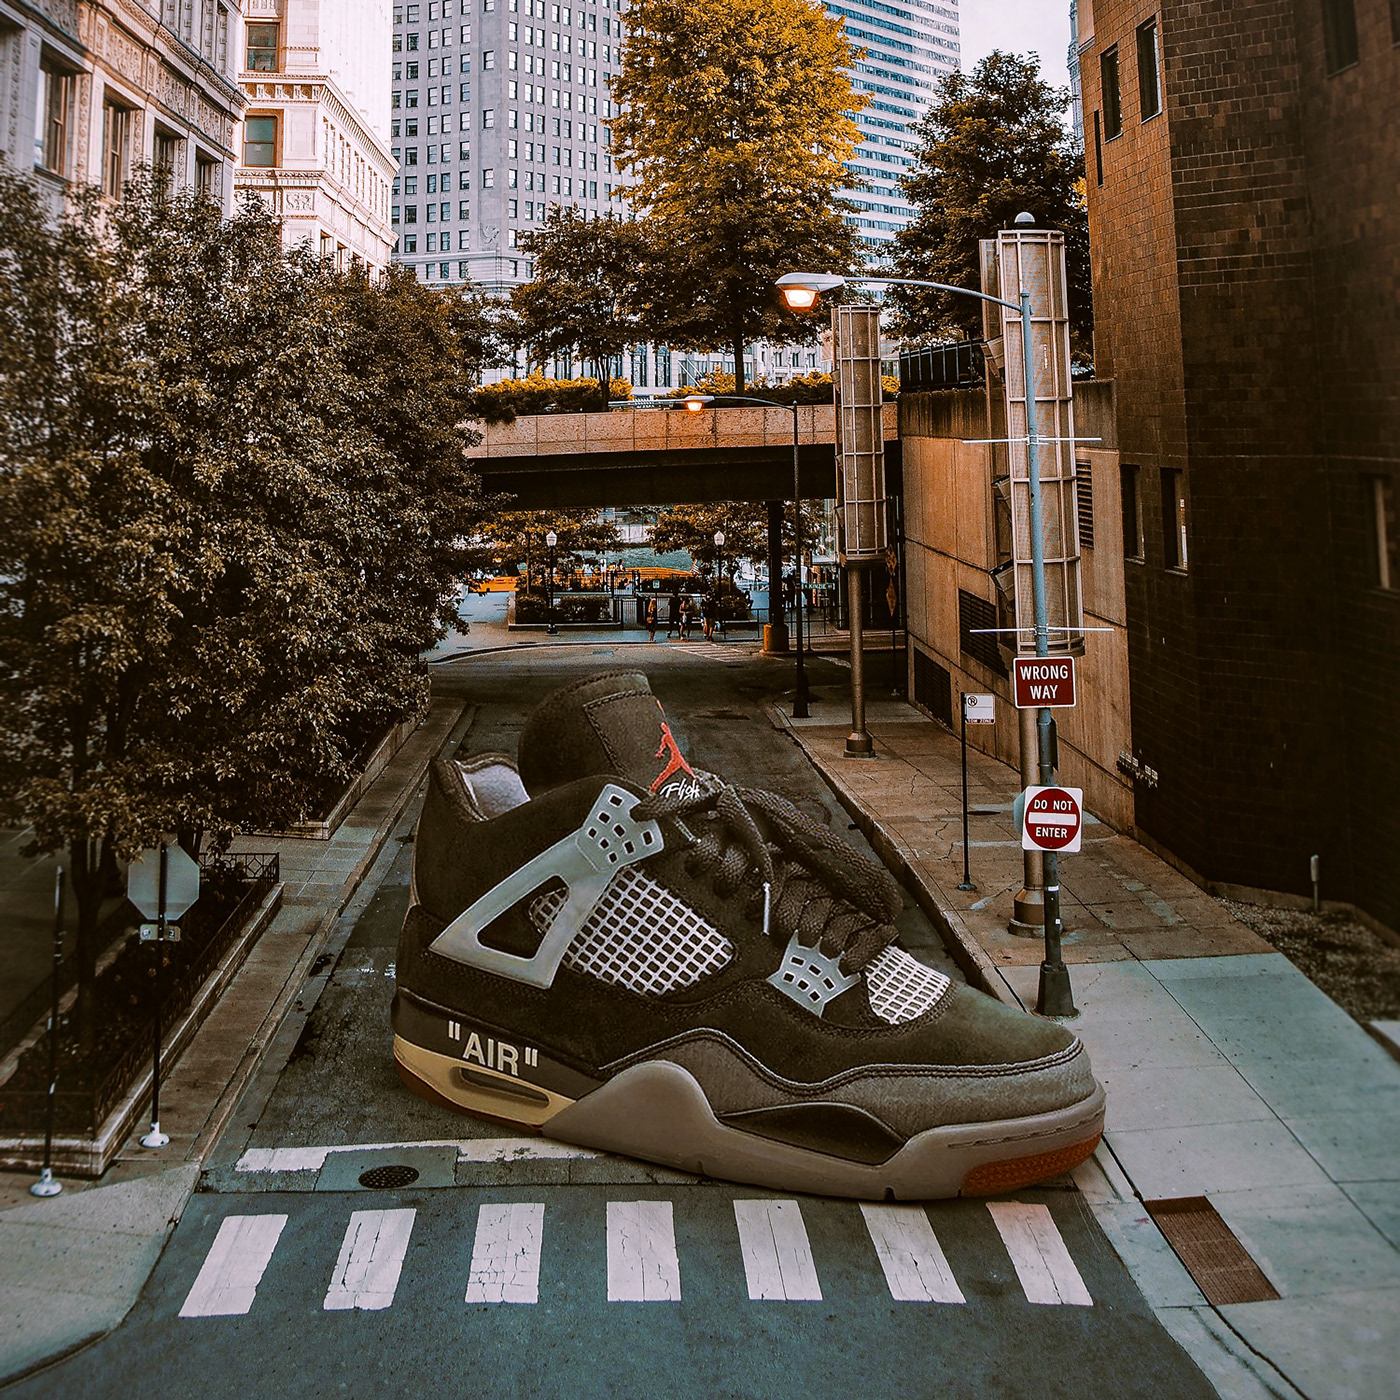 giant sneaker photo composite. retouching and image manipulation done with photoshop